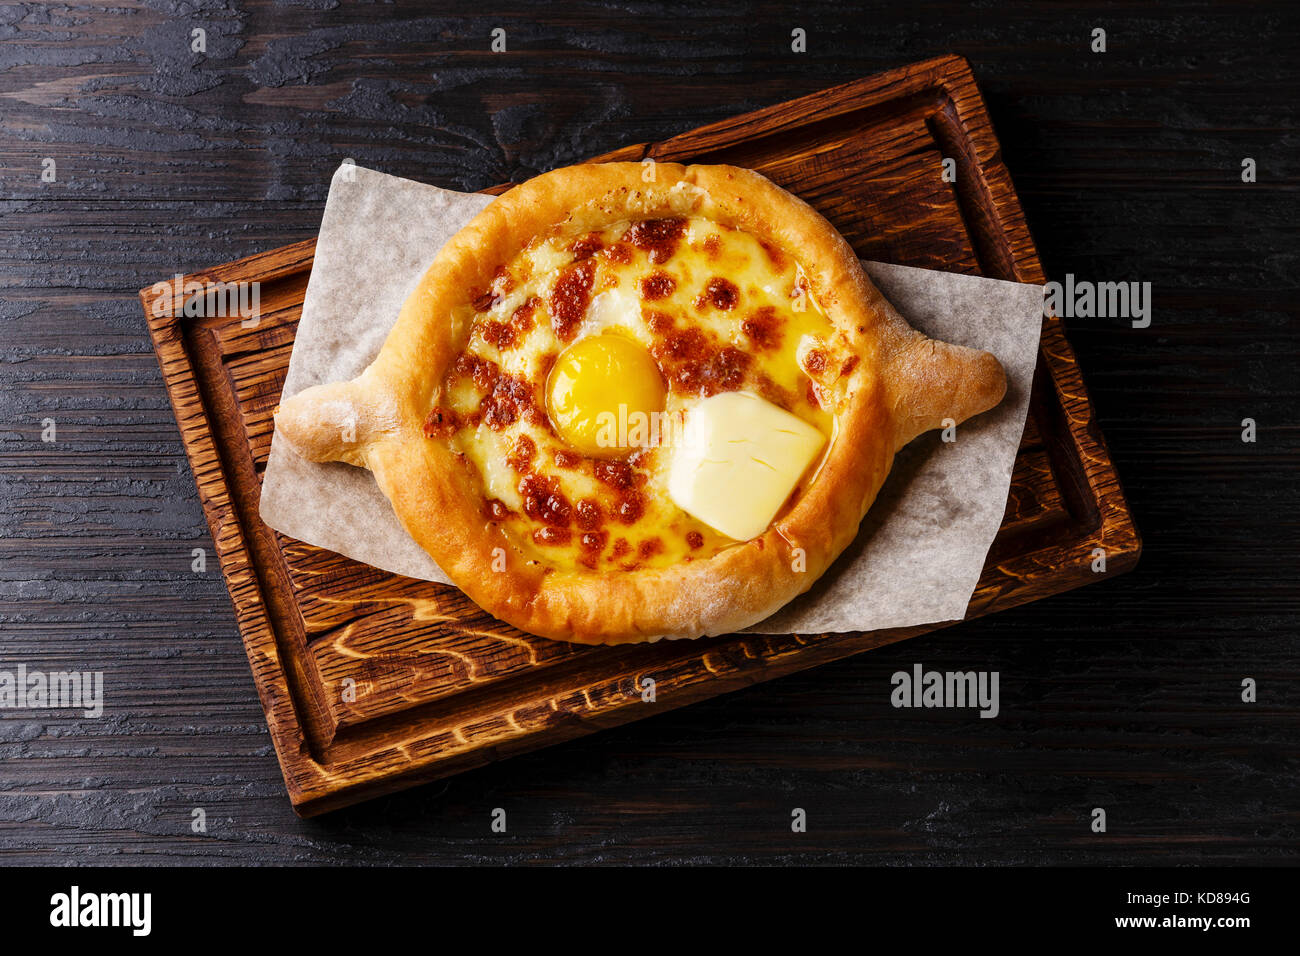 Georgian cheese pastry Ajarian Khachapuri serving size on burned black wooden background Stock Photo